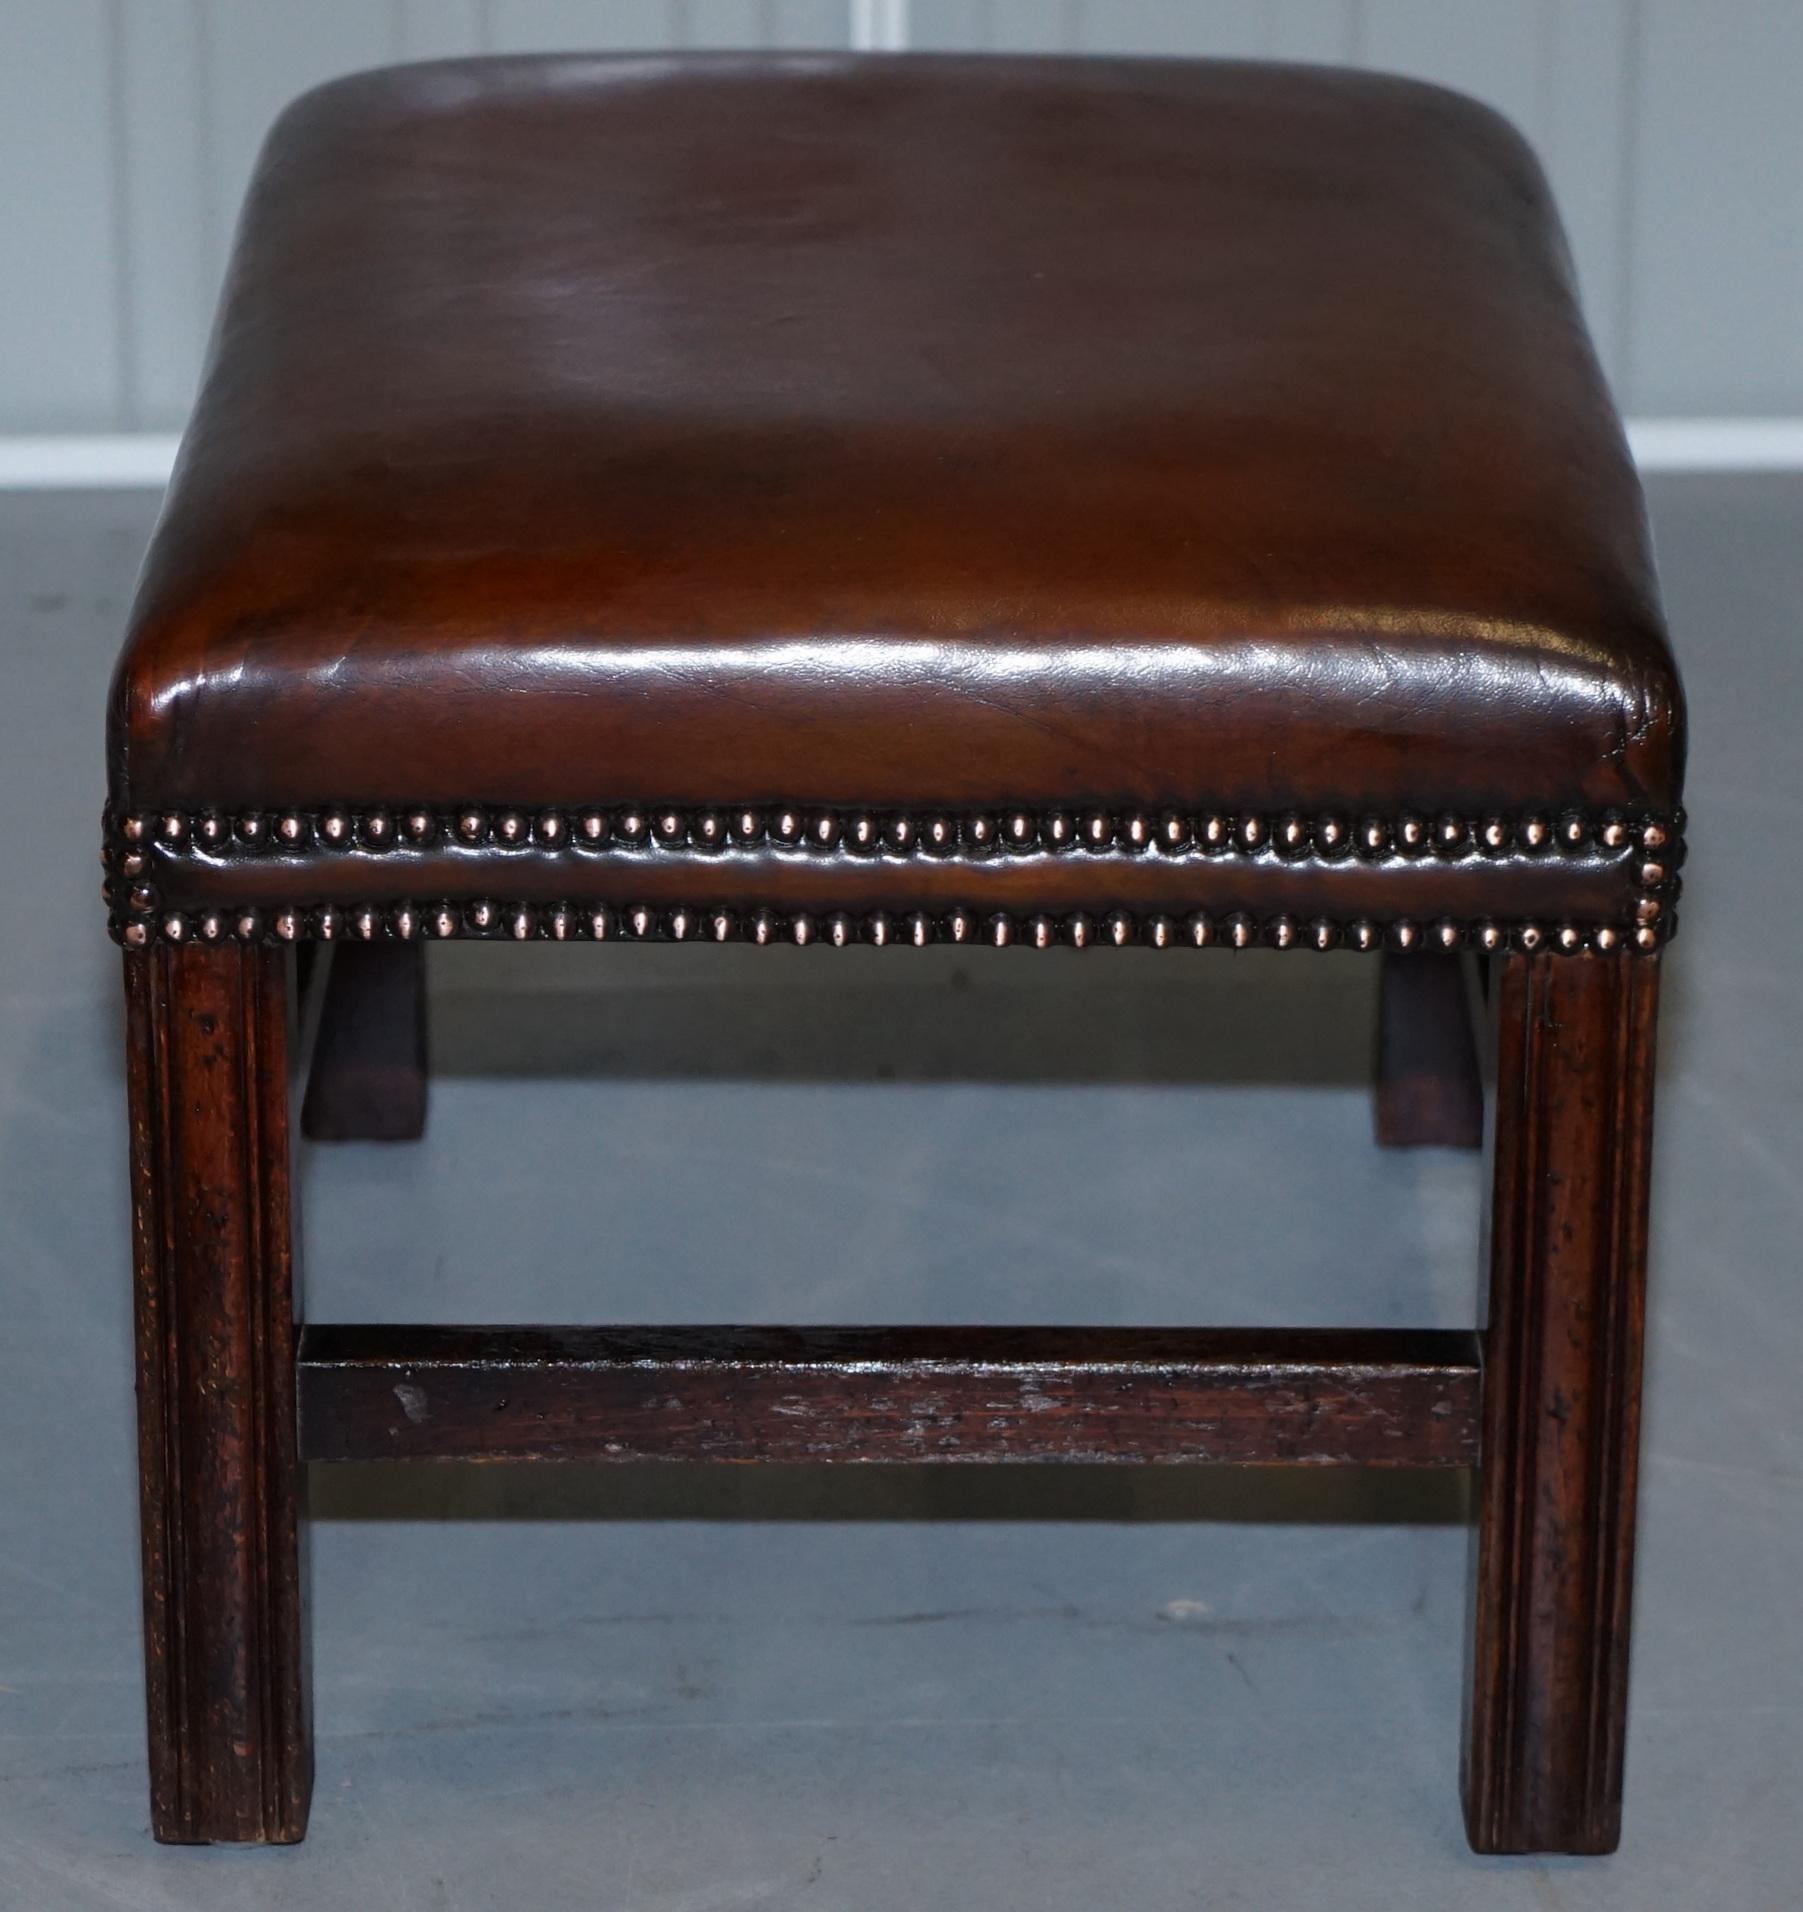 Fully Restored Hand Dyed Cigar Brown Leather Footstool Beech Wood Frame 1